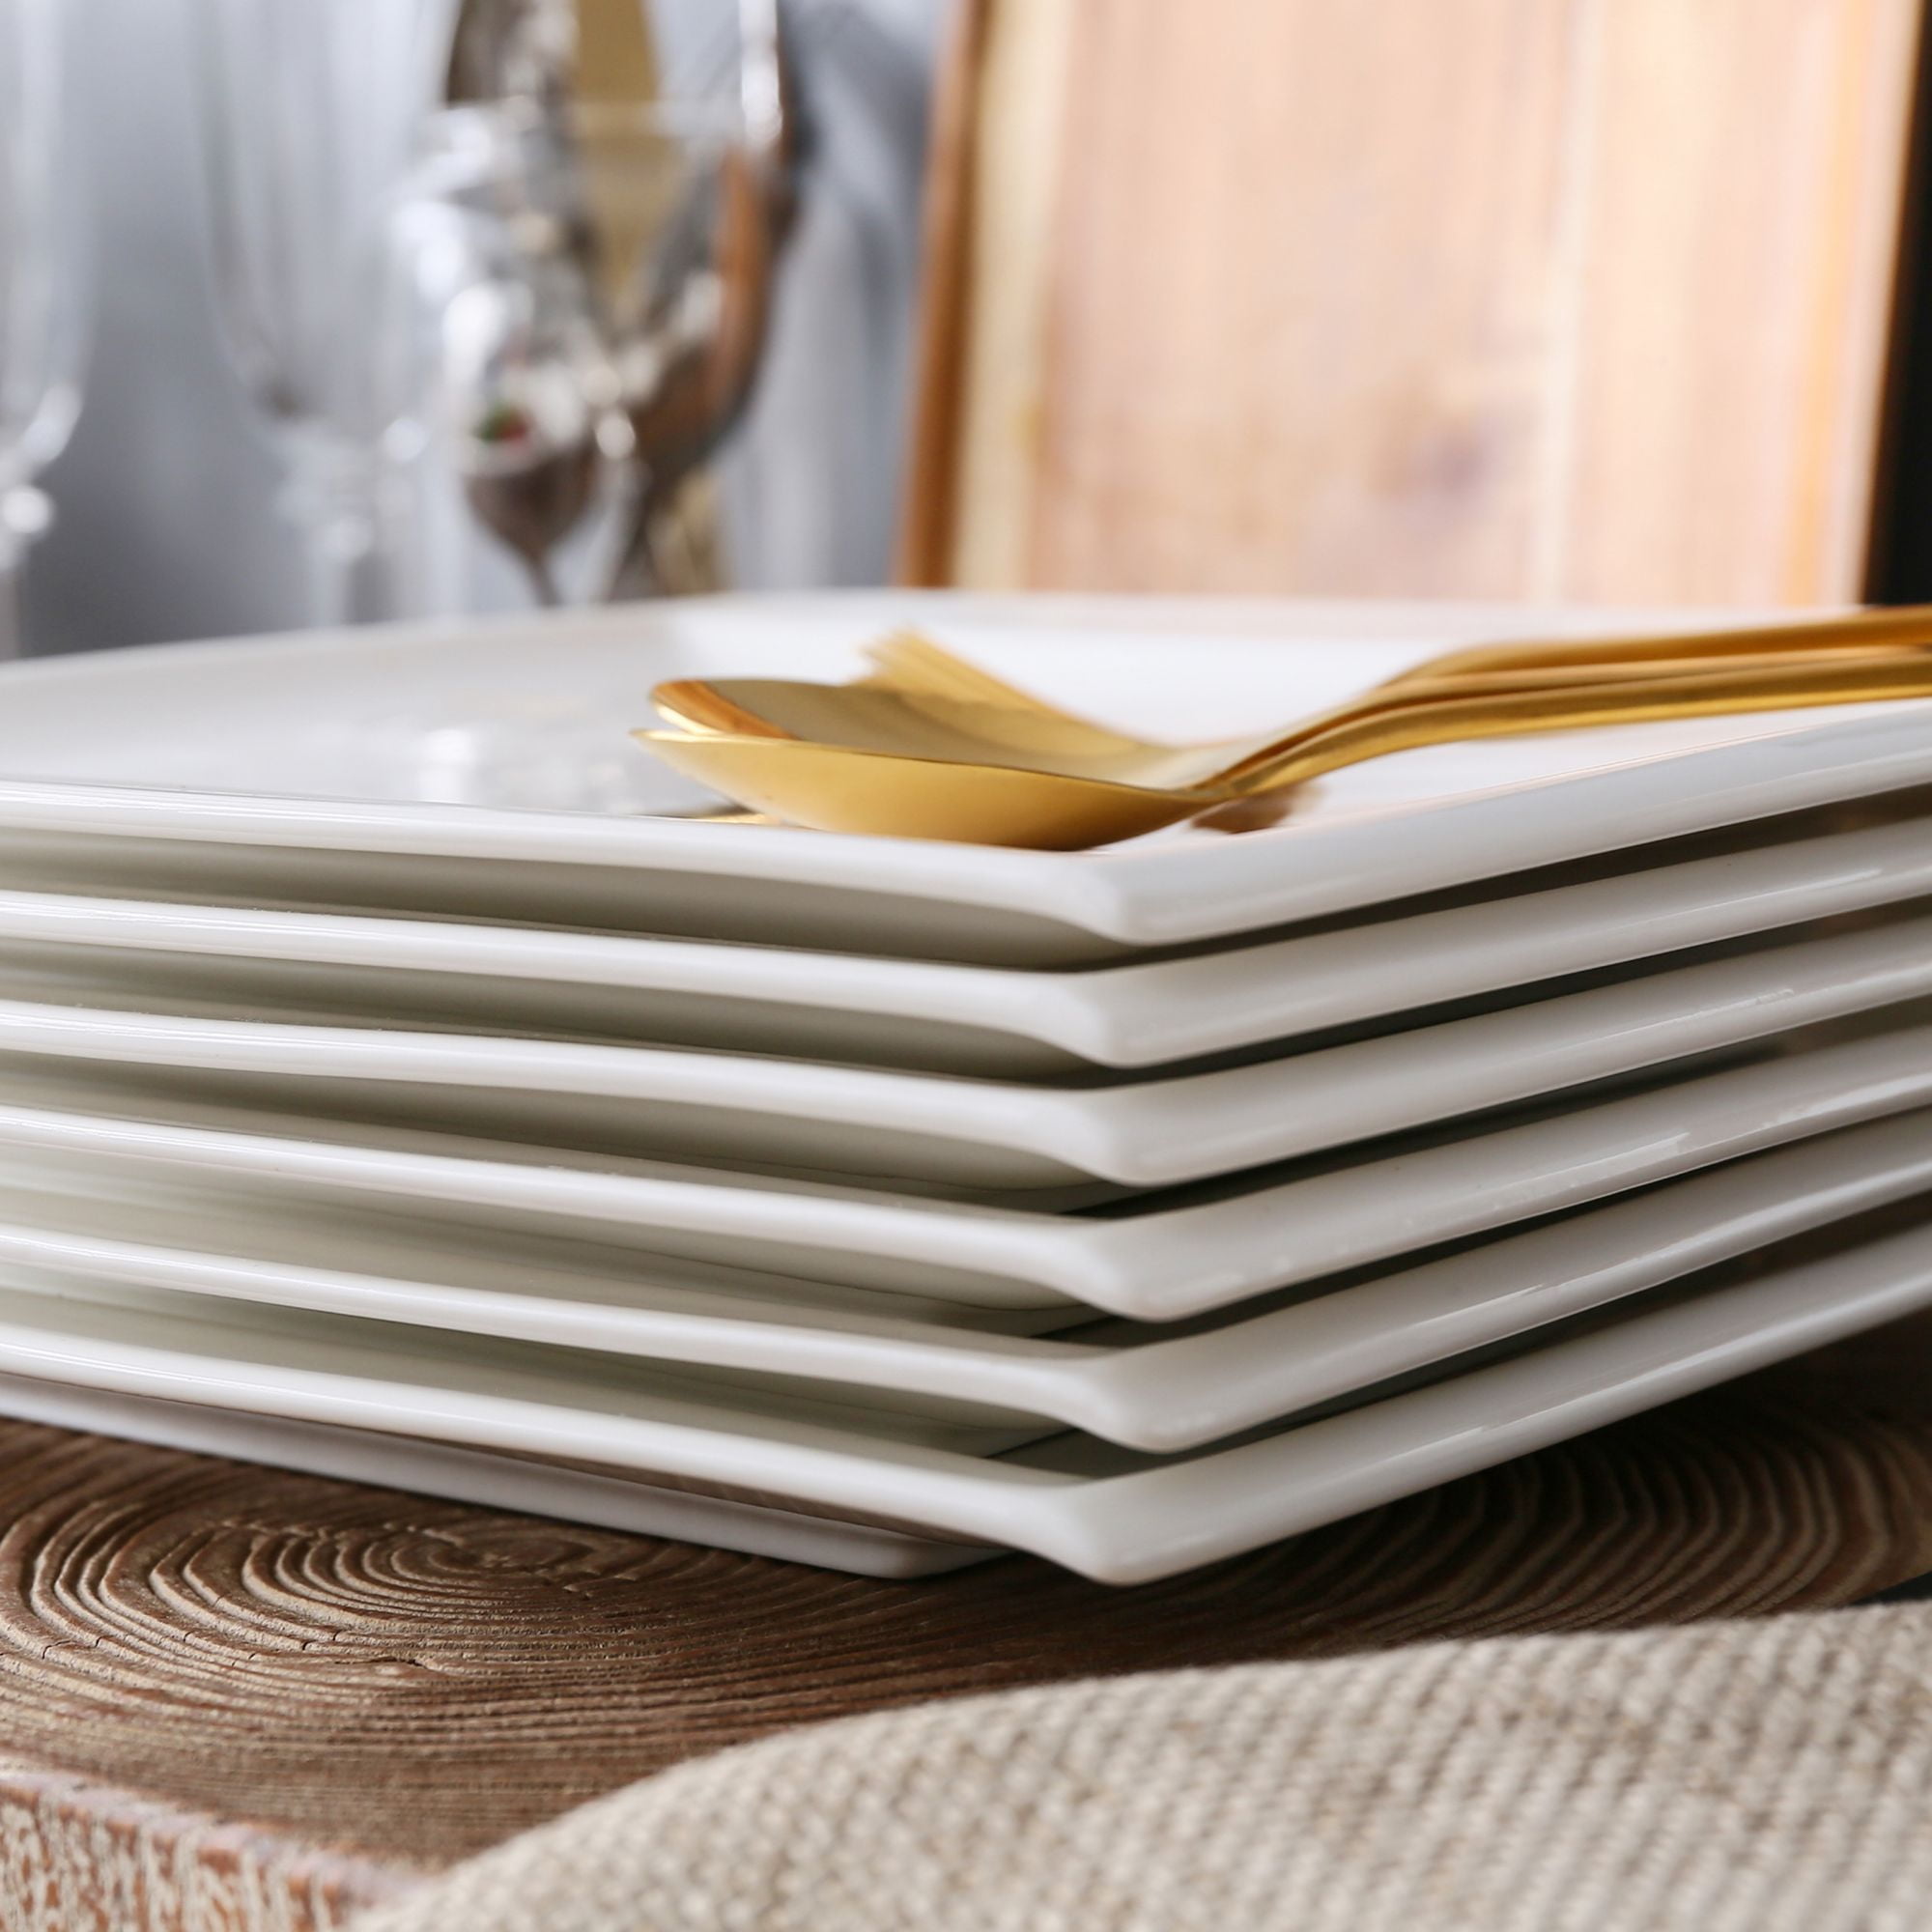 Malacasa Flora White Porcelain Fall Dinnerware Sets Clearance With 12xcup  Saucer, Dessert, Soup Plate Perfect For 12 People DHKRH From Bdesybag,  $154.23